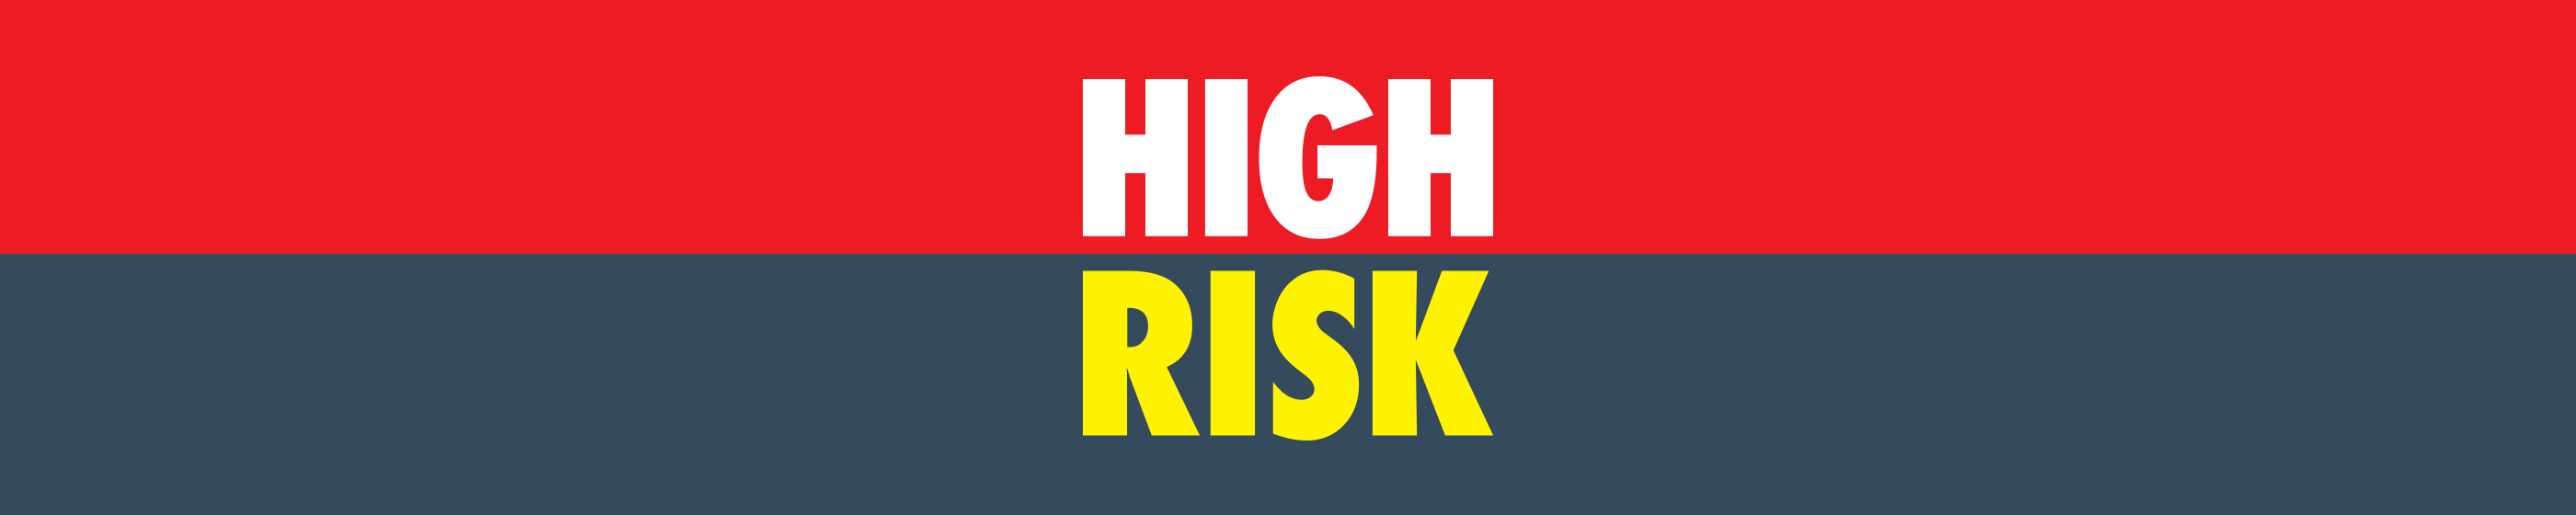 High Risk Button Cover Image